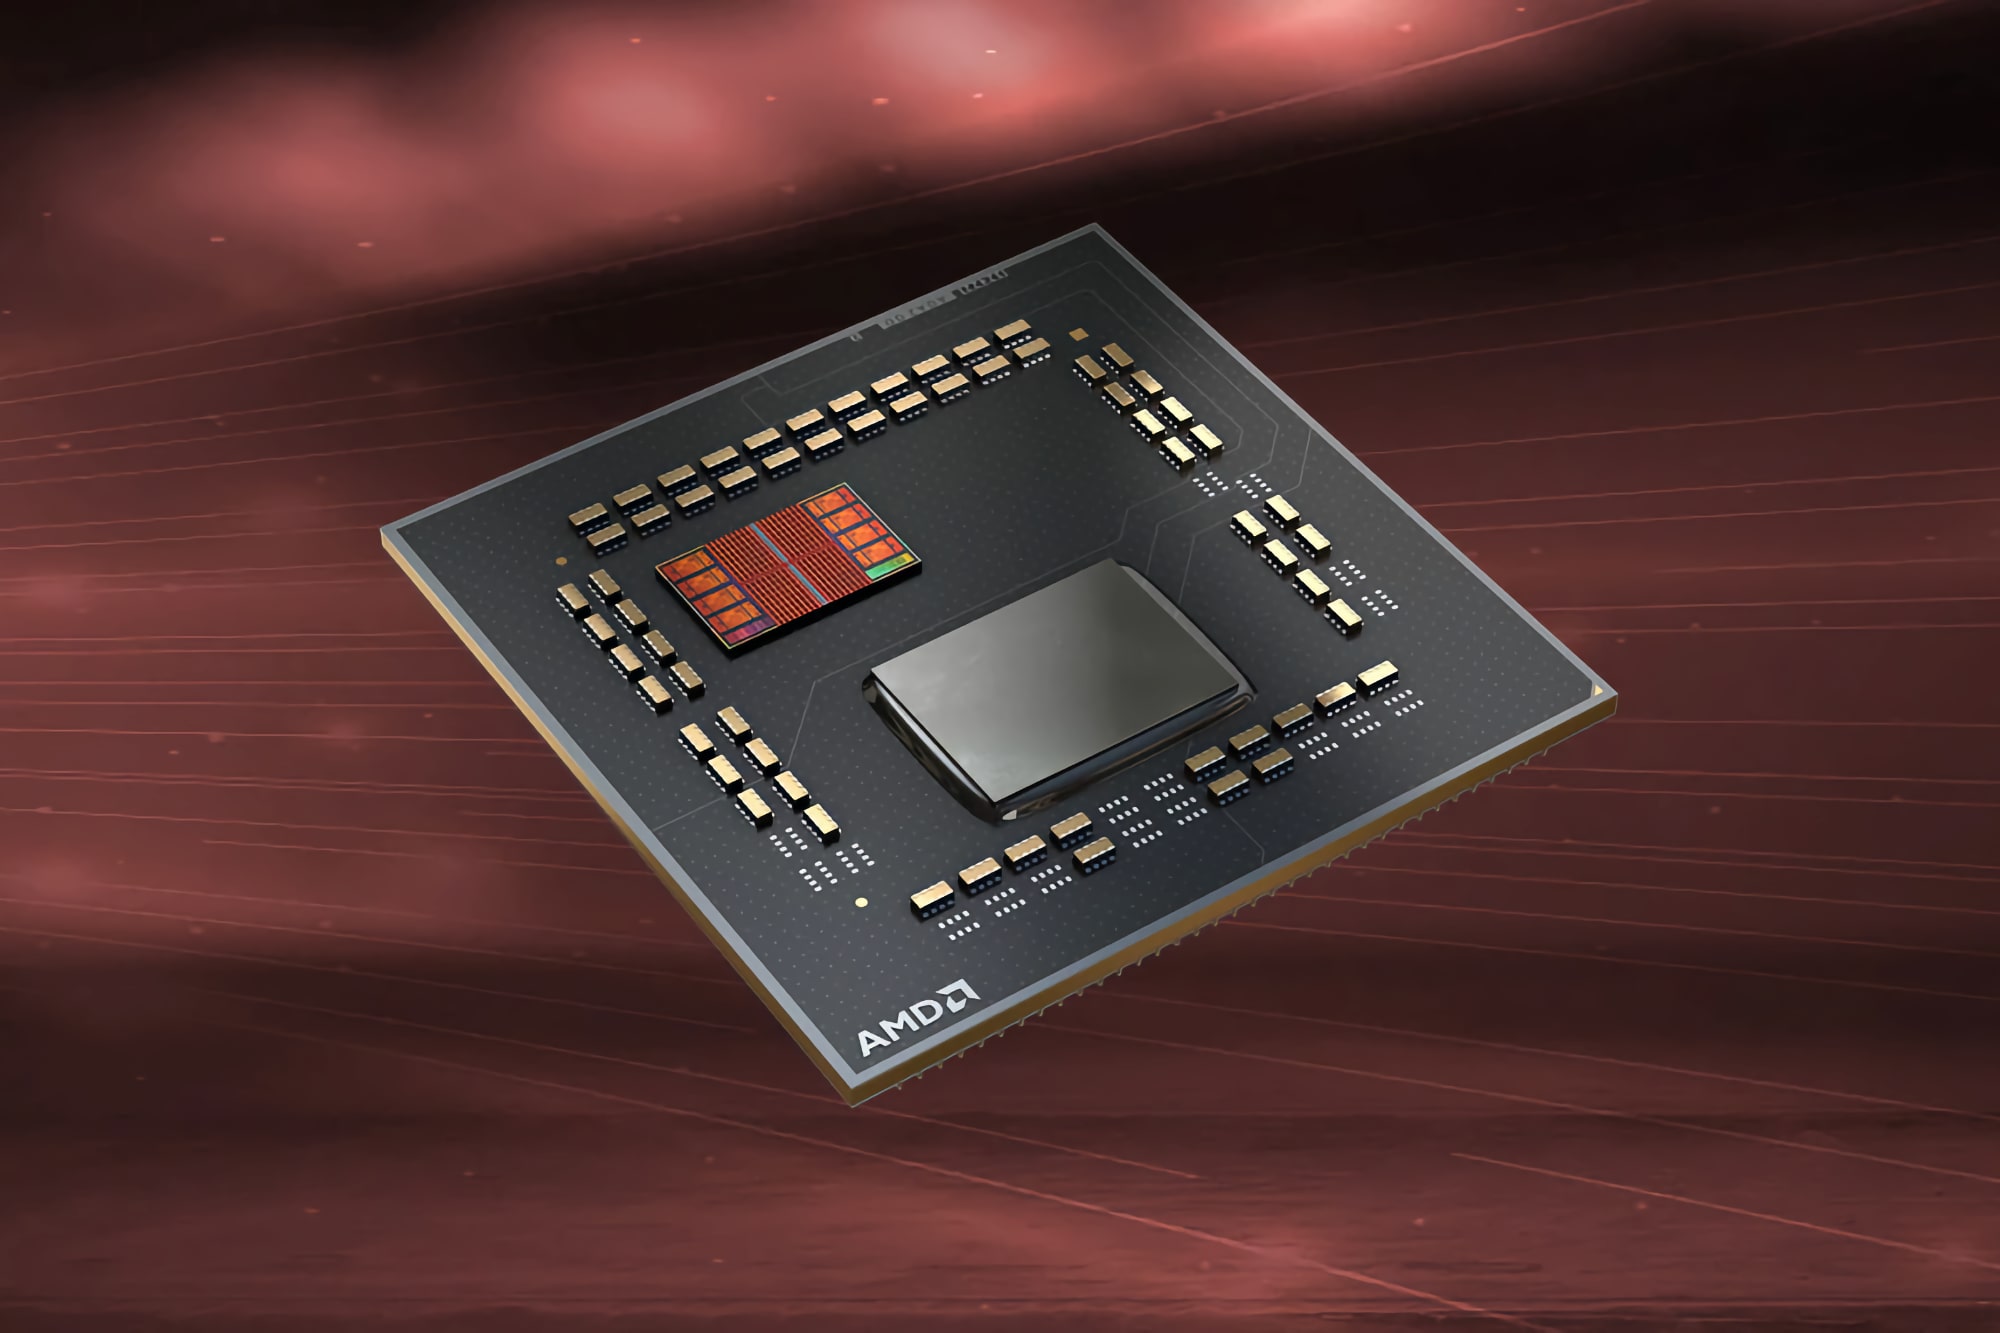 AMD 7000X3D V-Cache CPUs could challenge Intel at CES 2023